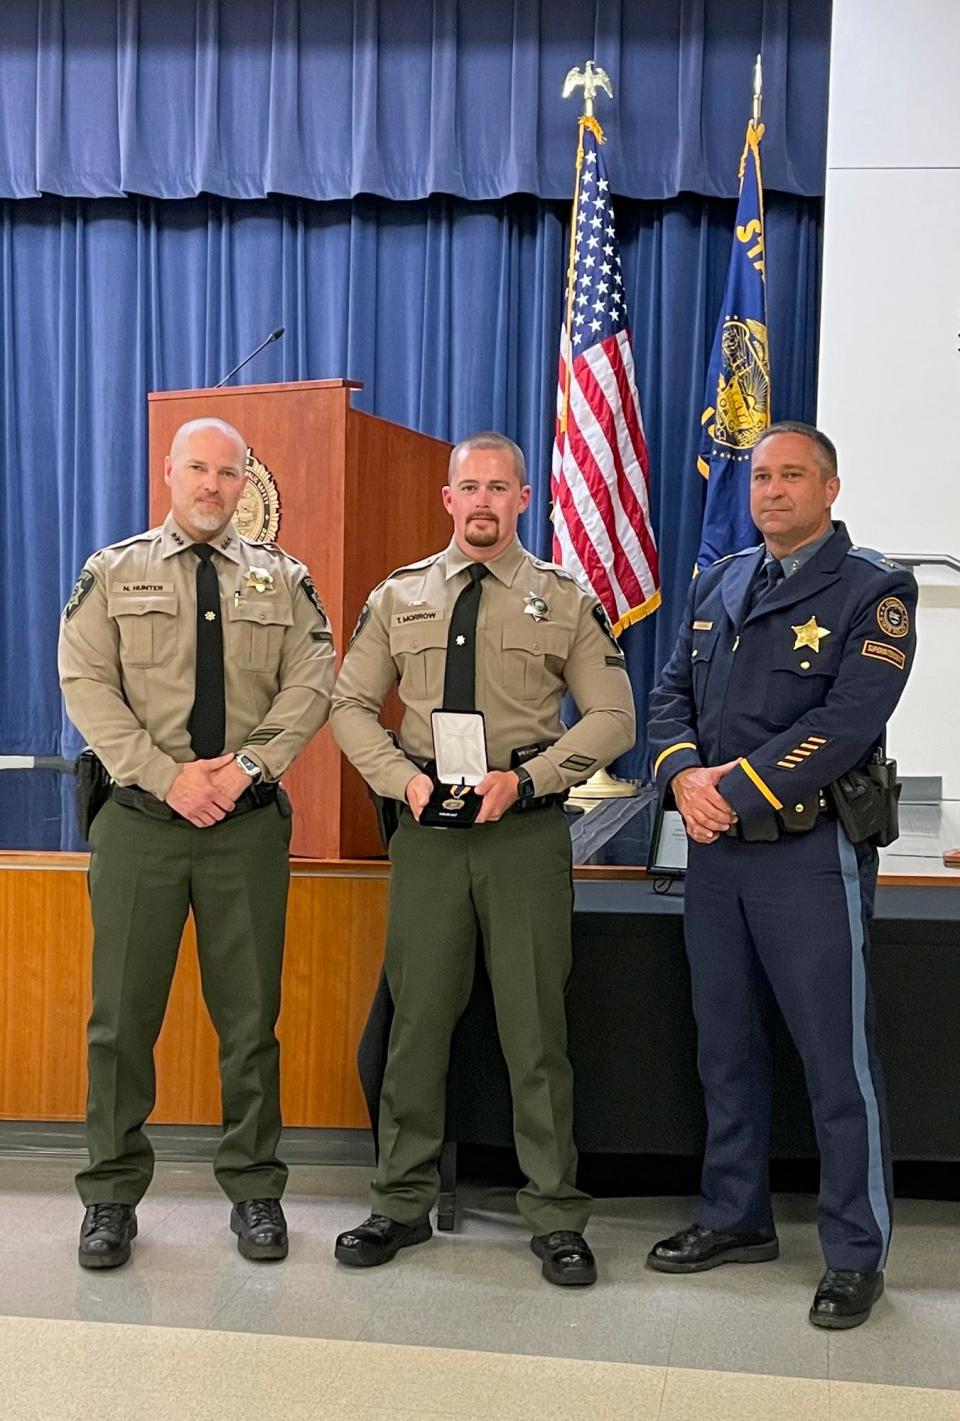 Deputy Sheriff Tyler Morrow, center, of the Marion County Sheriff's Office, poses with Marion County Sheriff Nick Hunter, left, and Oregon State Police Superintendent Casey Codding, right. Morrow was awarded a Law Enforcement Medal of Honor for his efforts to save a fellow officer shot in the line of duty.